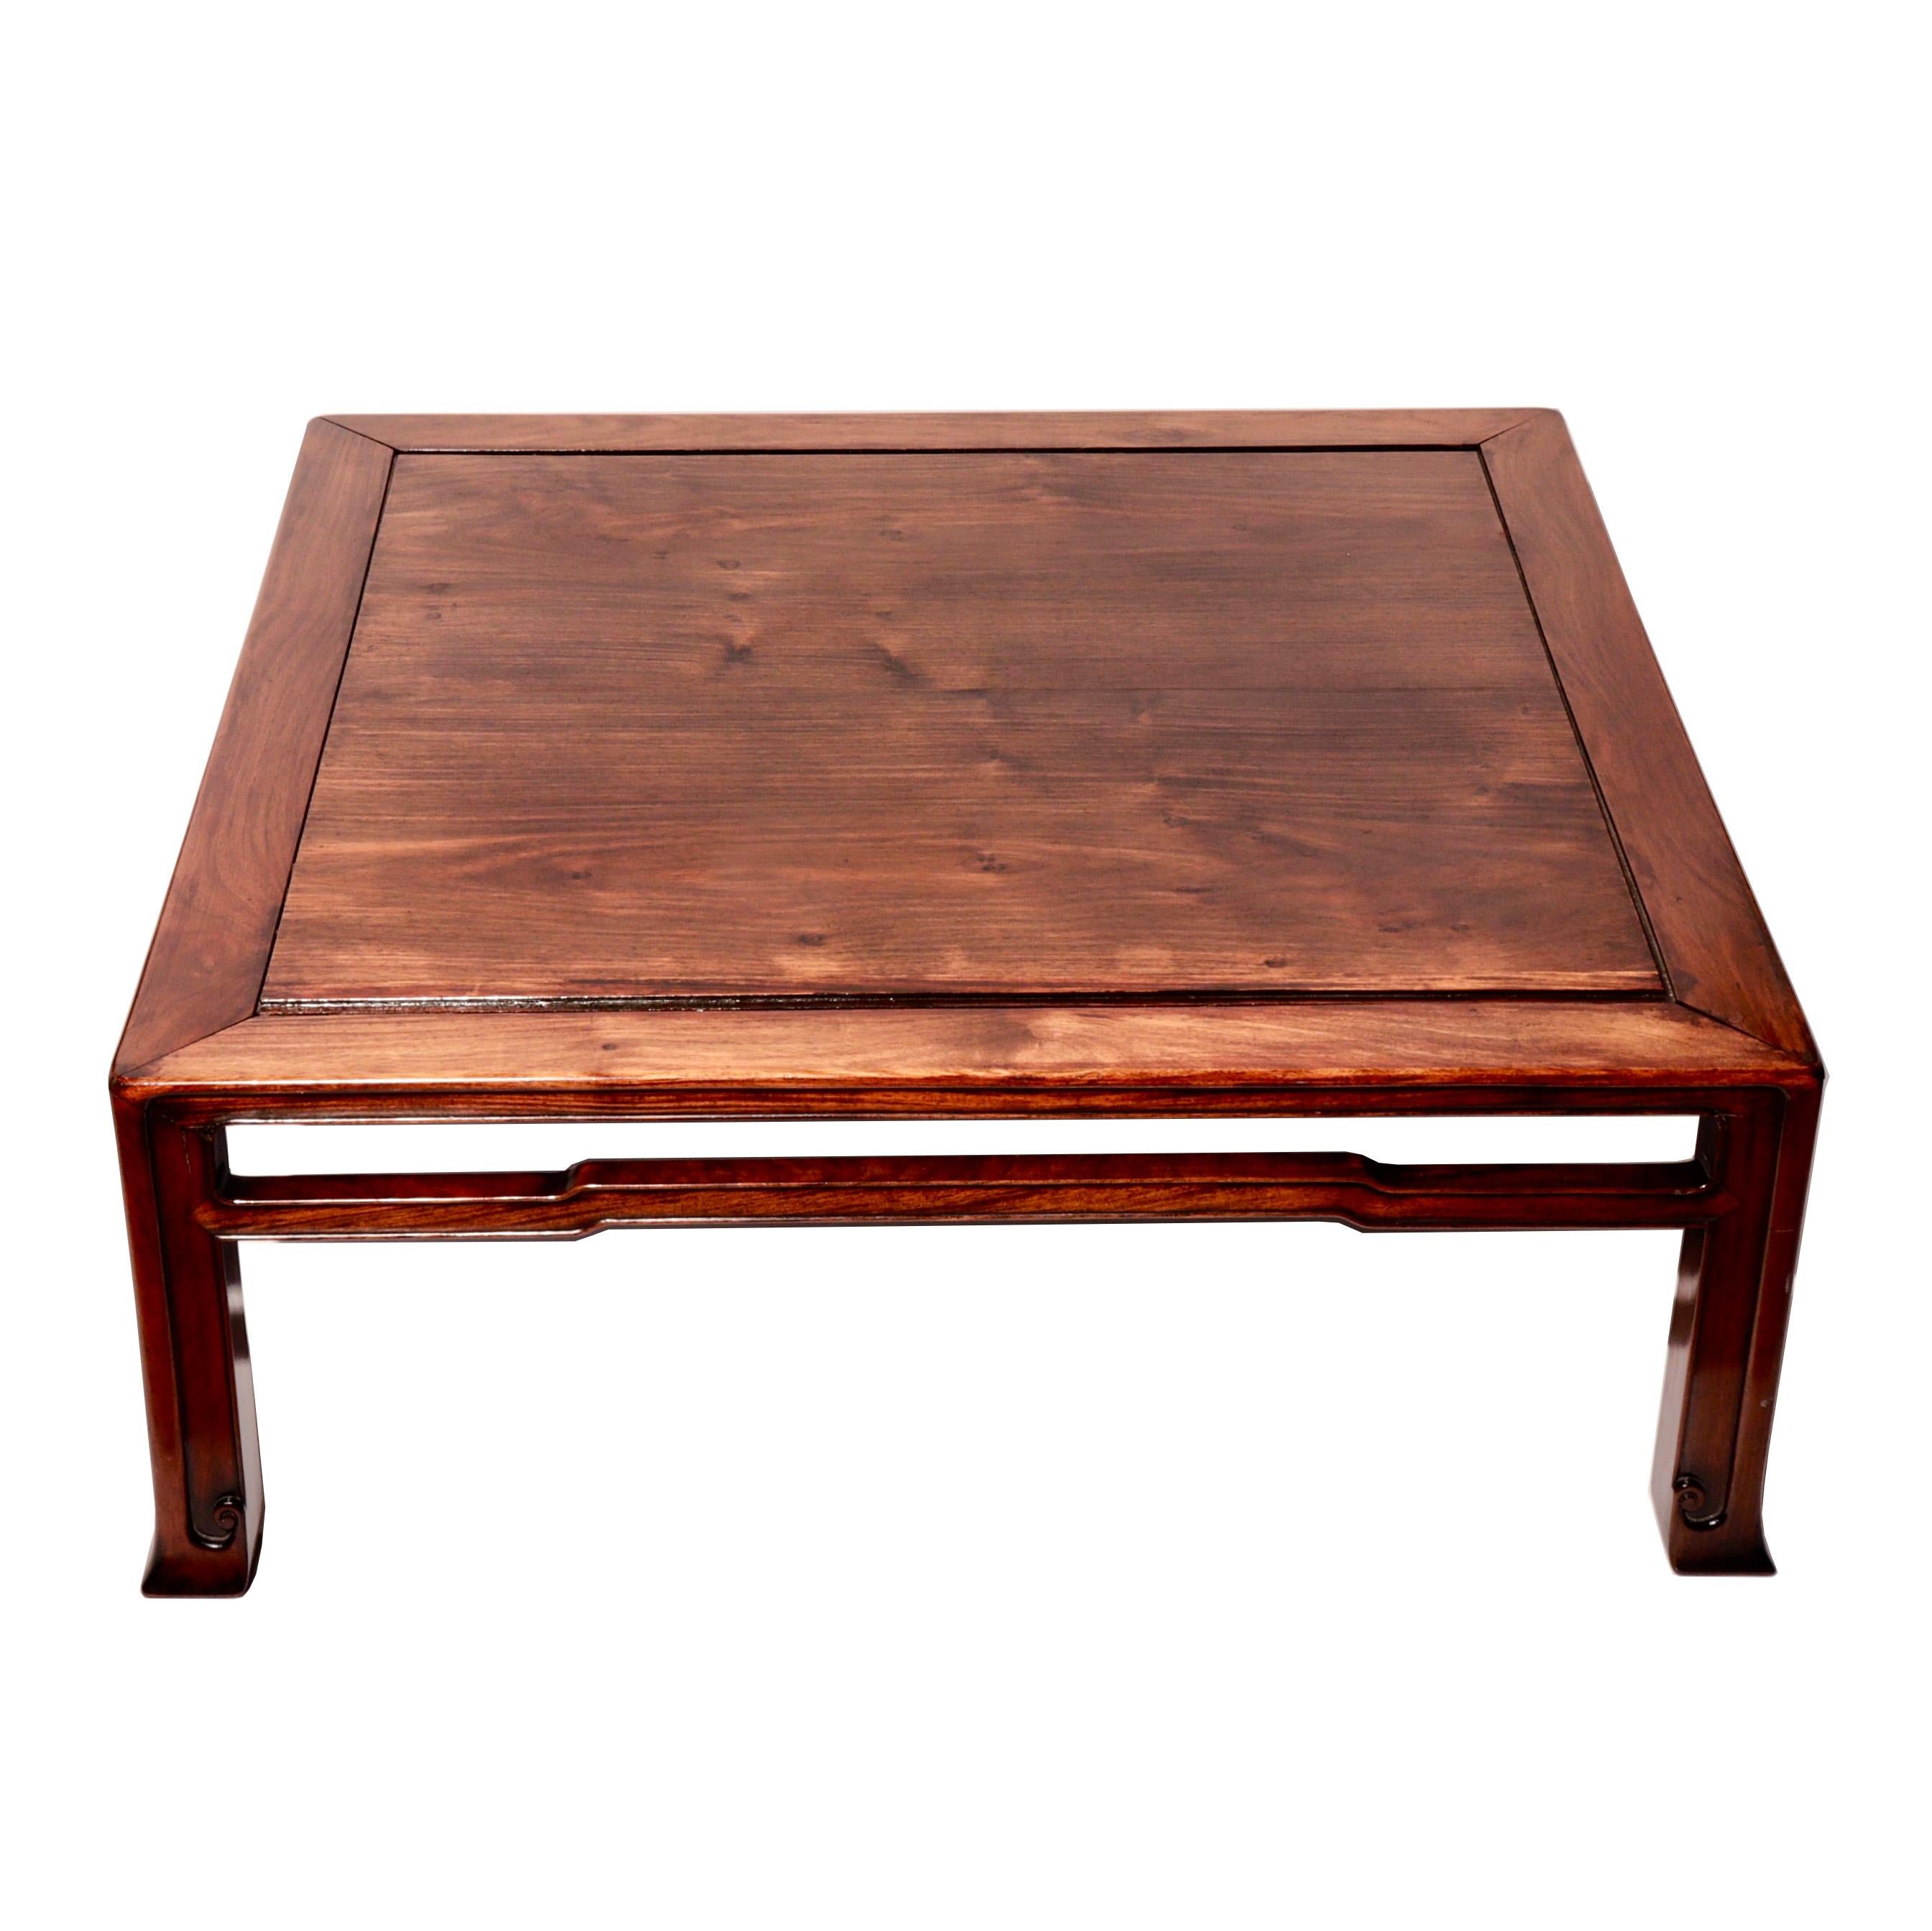 Japanese rosewood square tea table in Chinese style having tapered legs with bracket hoof feet, elbowed cross-struts and a center floating panel.
Condition: Minor shrinkage, surface scratches, and signs of age otherwise fine condition.
Measure: 13